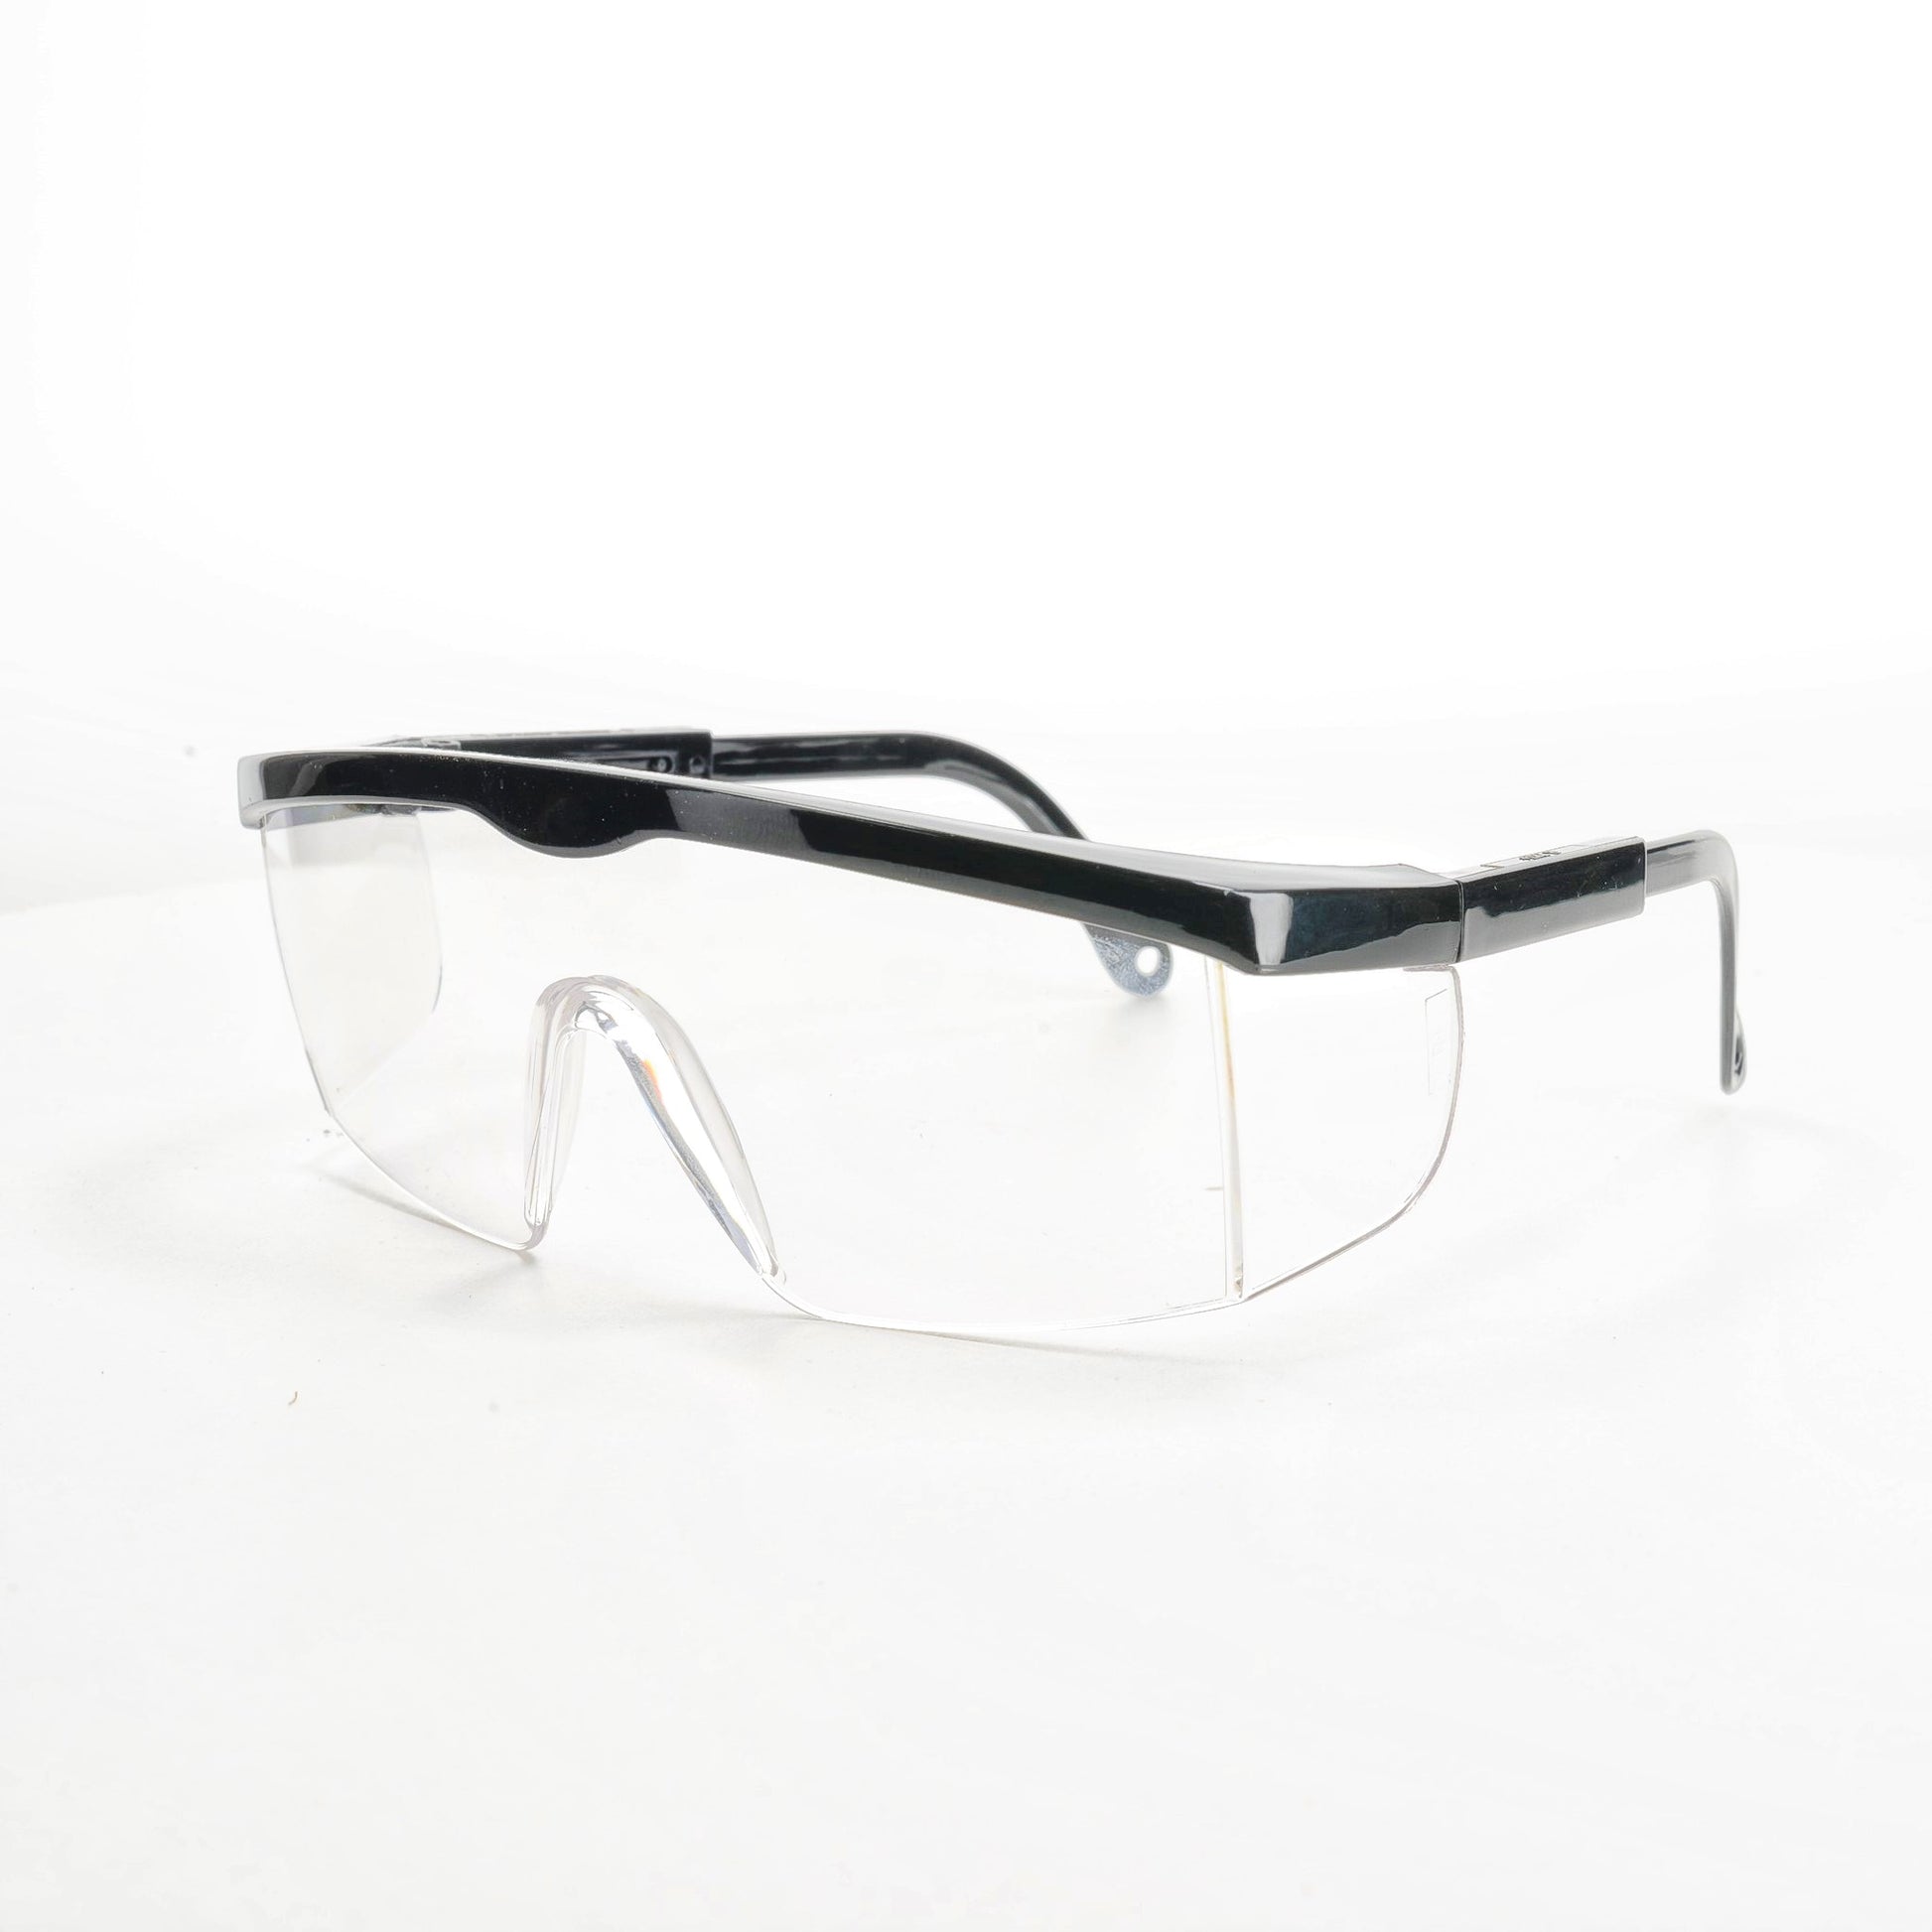 Safety glasses viewed from front right